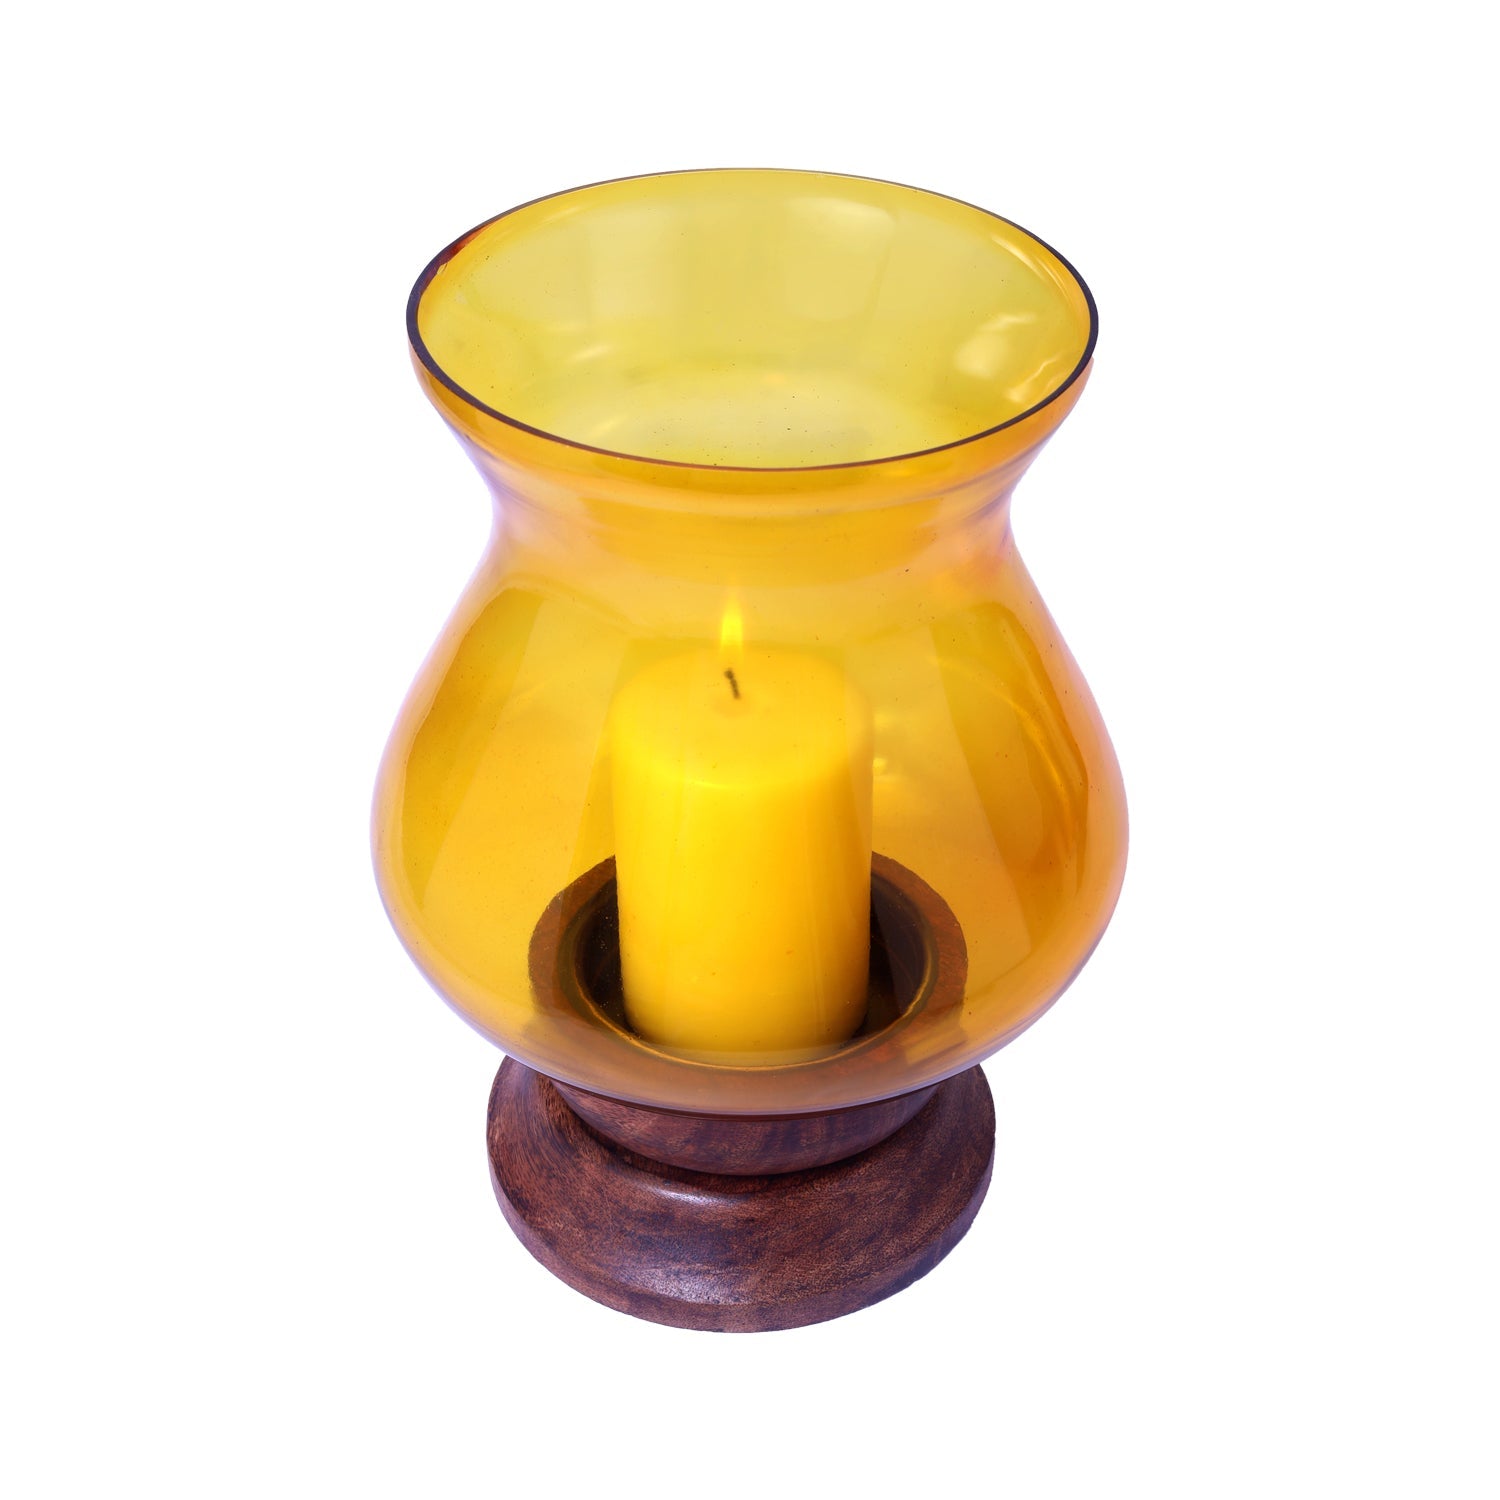 HOSLEY Pillar Candle Holder Beautiful Table Top Candle Holder with Pillar Candle made from Wood & Glass, Yellow, Pack of 1